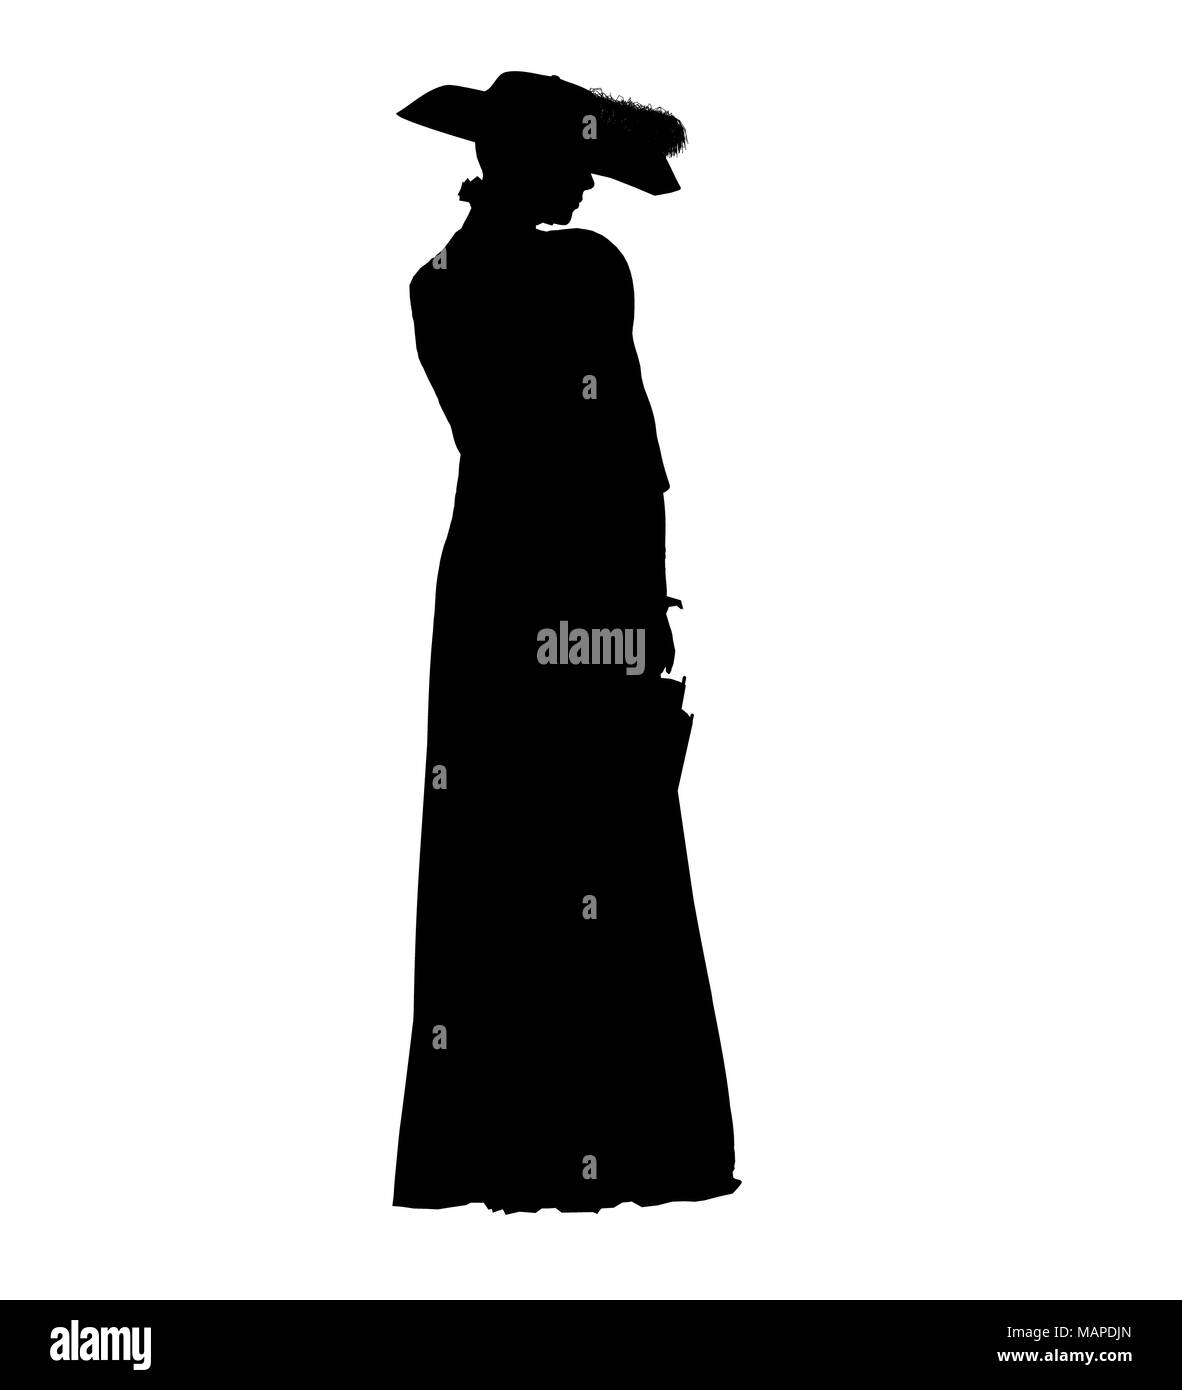 Female victorian art illustration silhouette on a white background ...